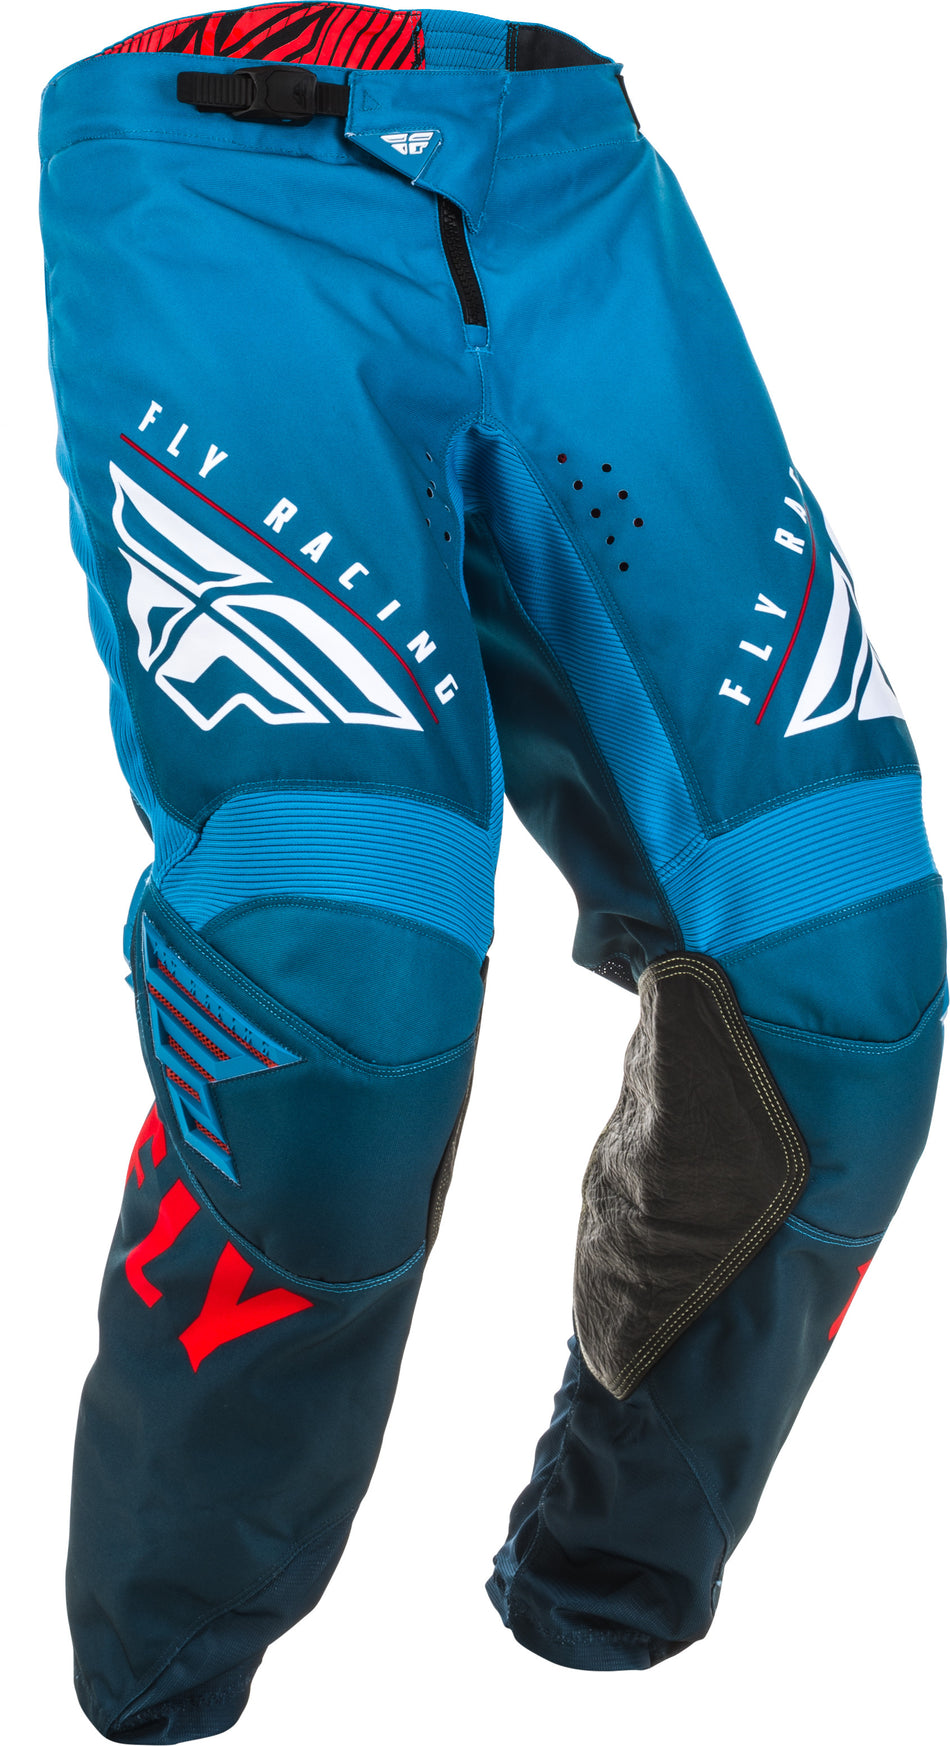 FLY RACING Kinetic K220 Pants Blue/White/Red Sz 38 373-53138